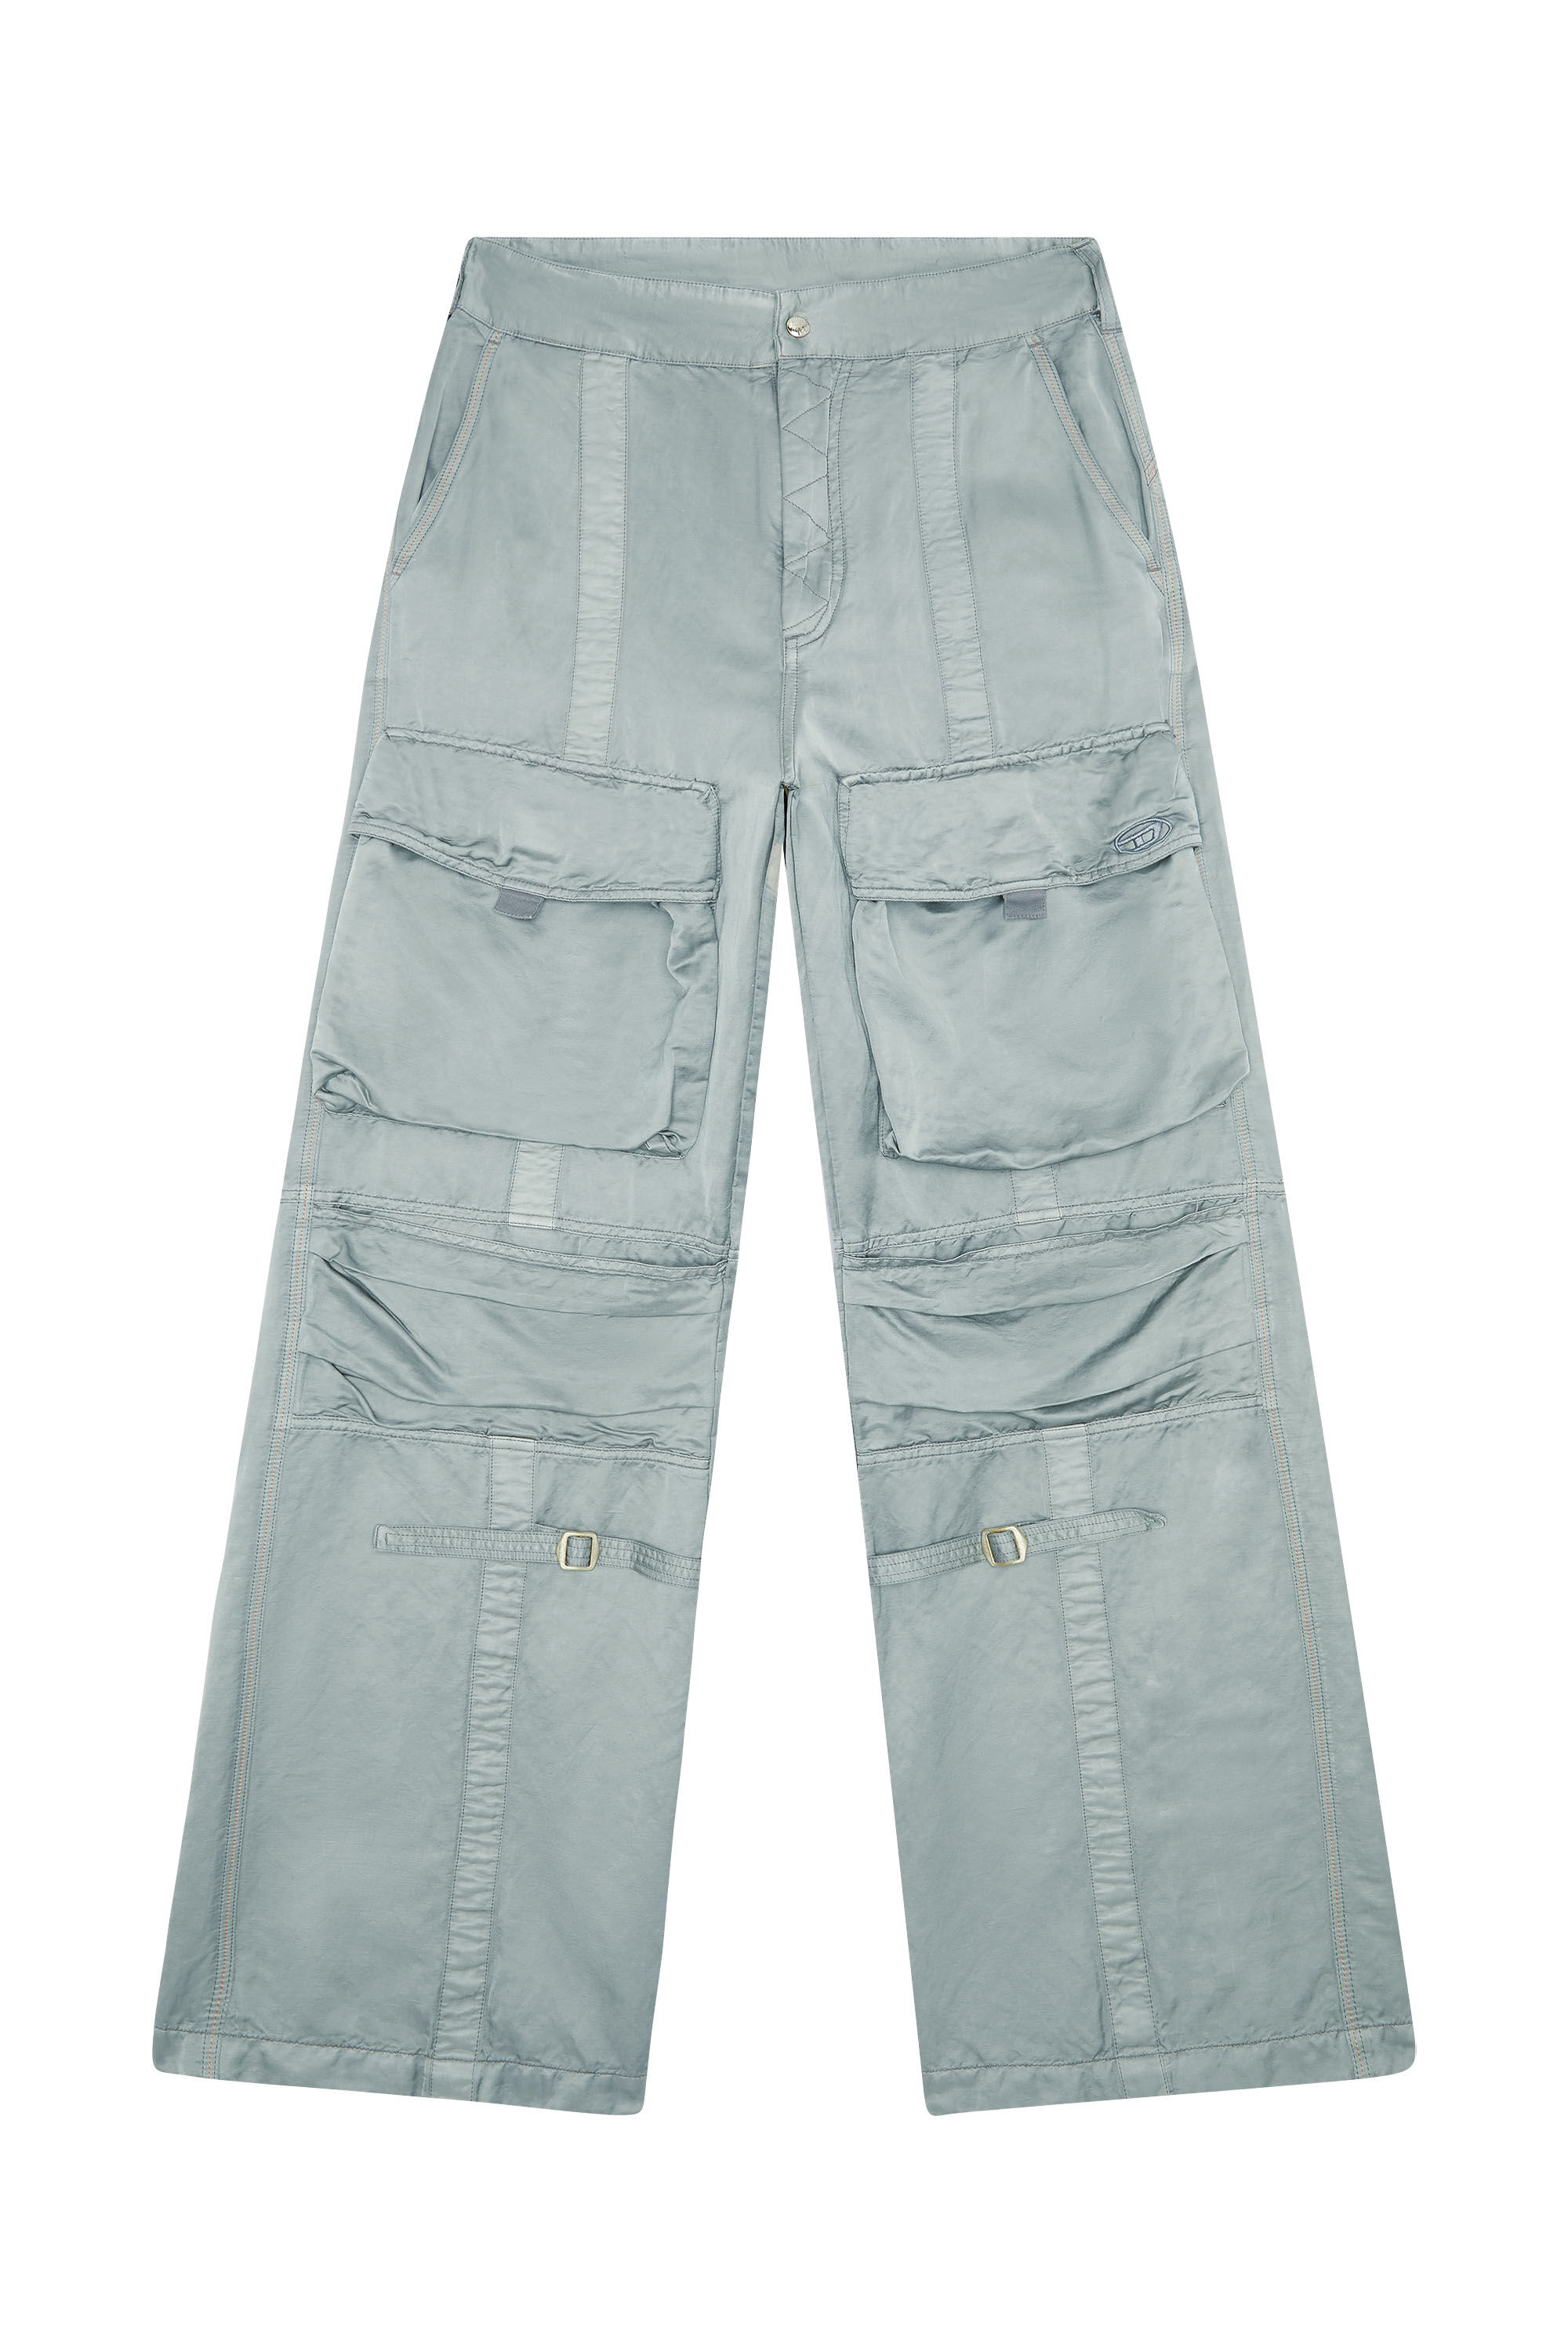 P-MOON Woman: Satin pants with multiple pockets | Diesel